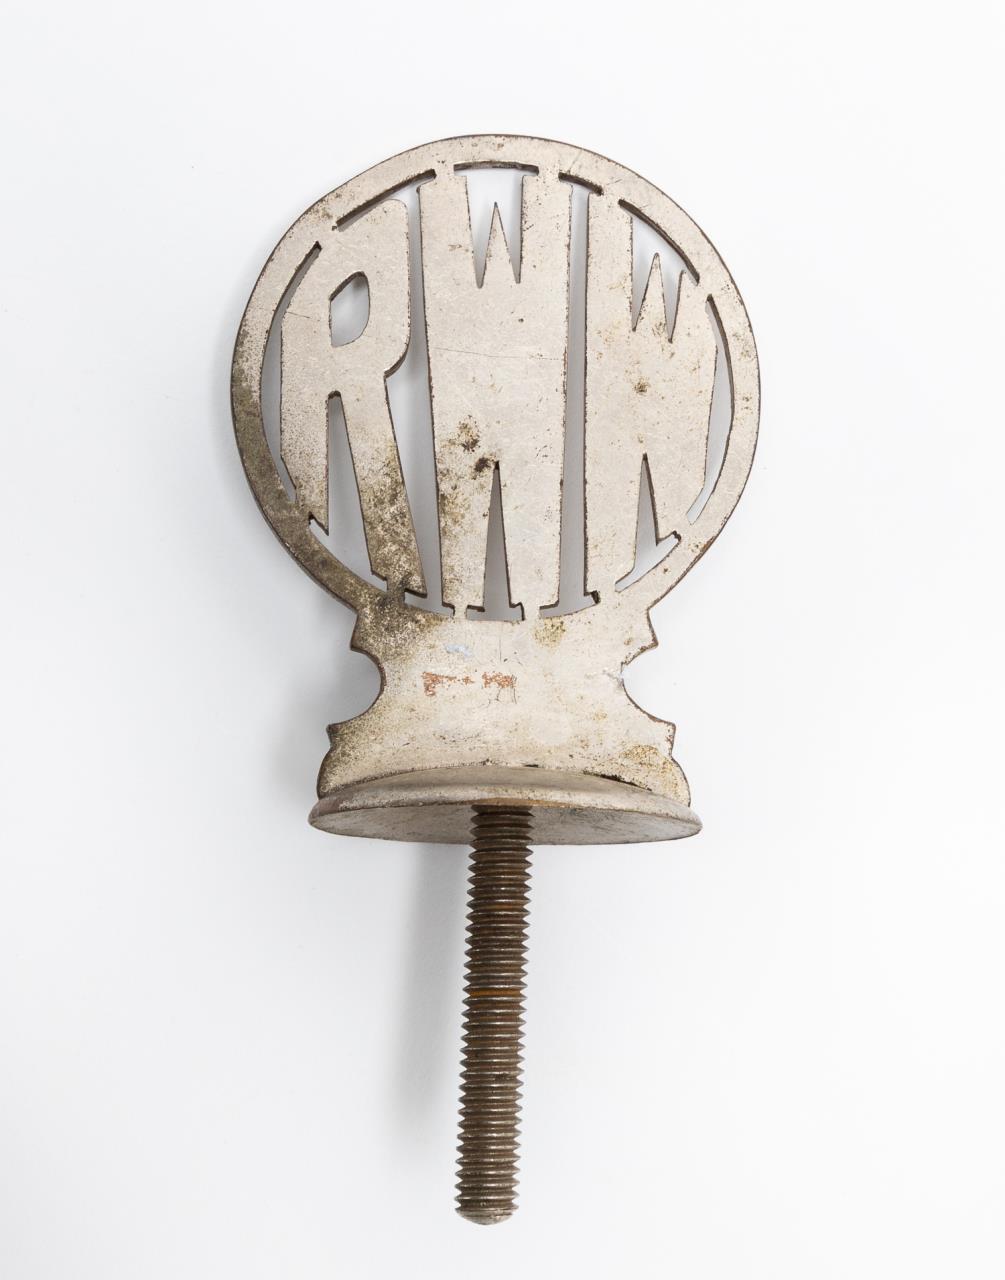 AUTOMOBILE HOOD ORNAMENT WITH RWW